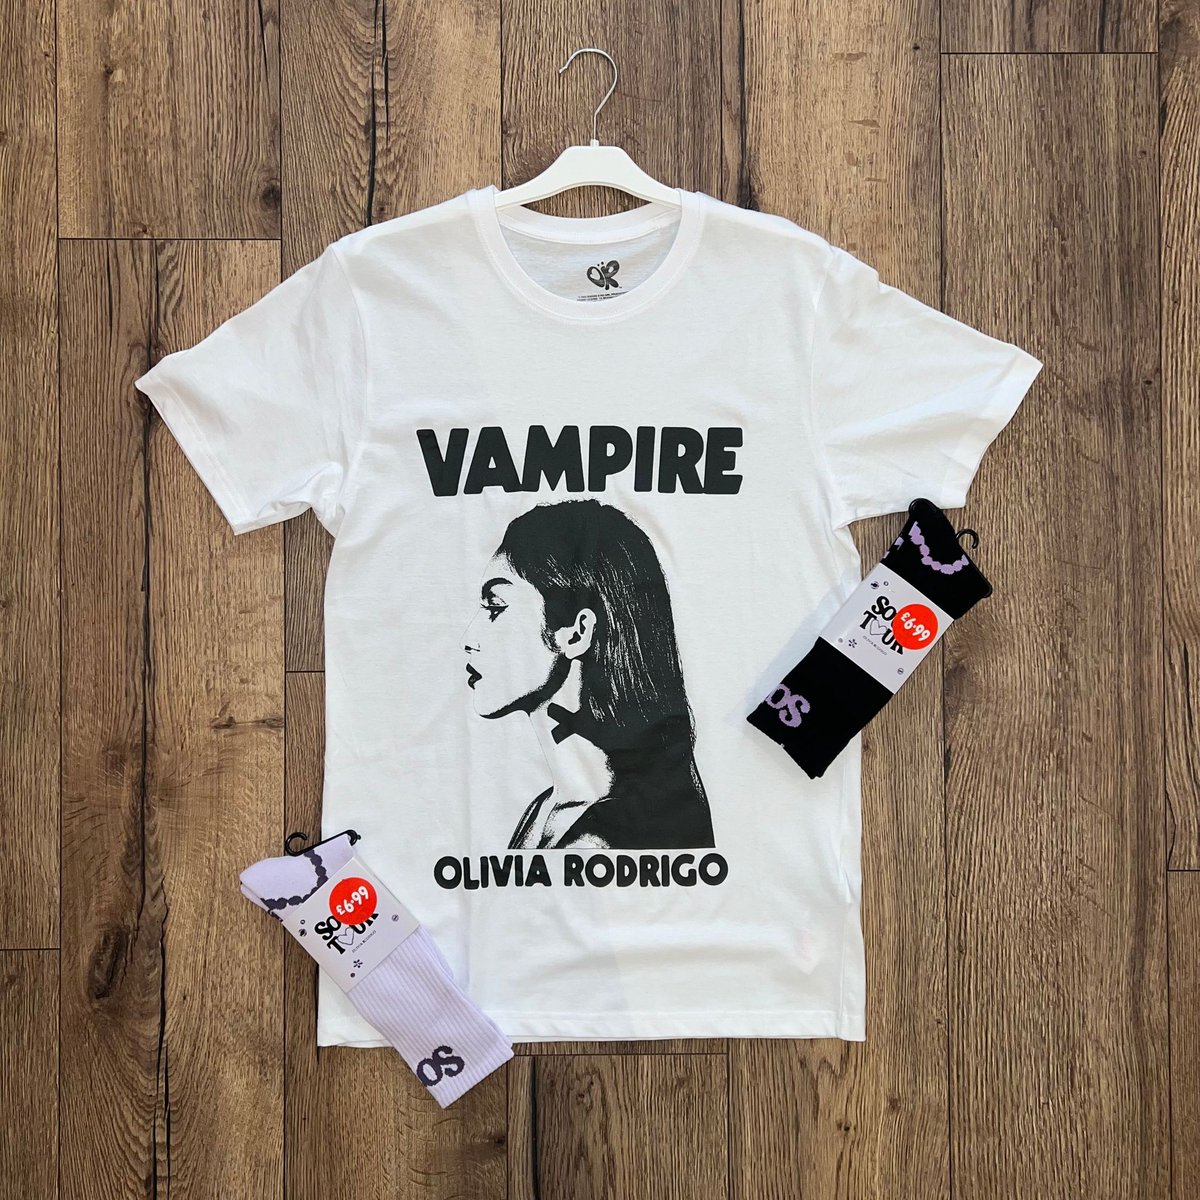 🧛‍♂️OLIVIA RODRIGO MERCH🧛‍♂️ Going through to Glasgow for the Olivia Rodrigo gigs tonight/tomorrow? We've got Olivia merch and Records available instore NOW! Be quick before they're all gone 🧛‍♂️ (also available at assai.co.uk) #oliviarodrigo #OR #assai #records #dundee